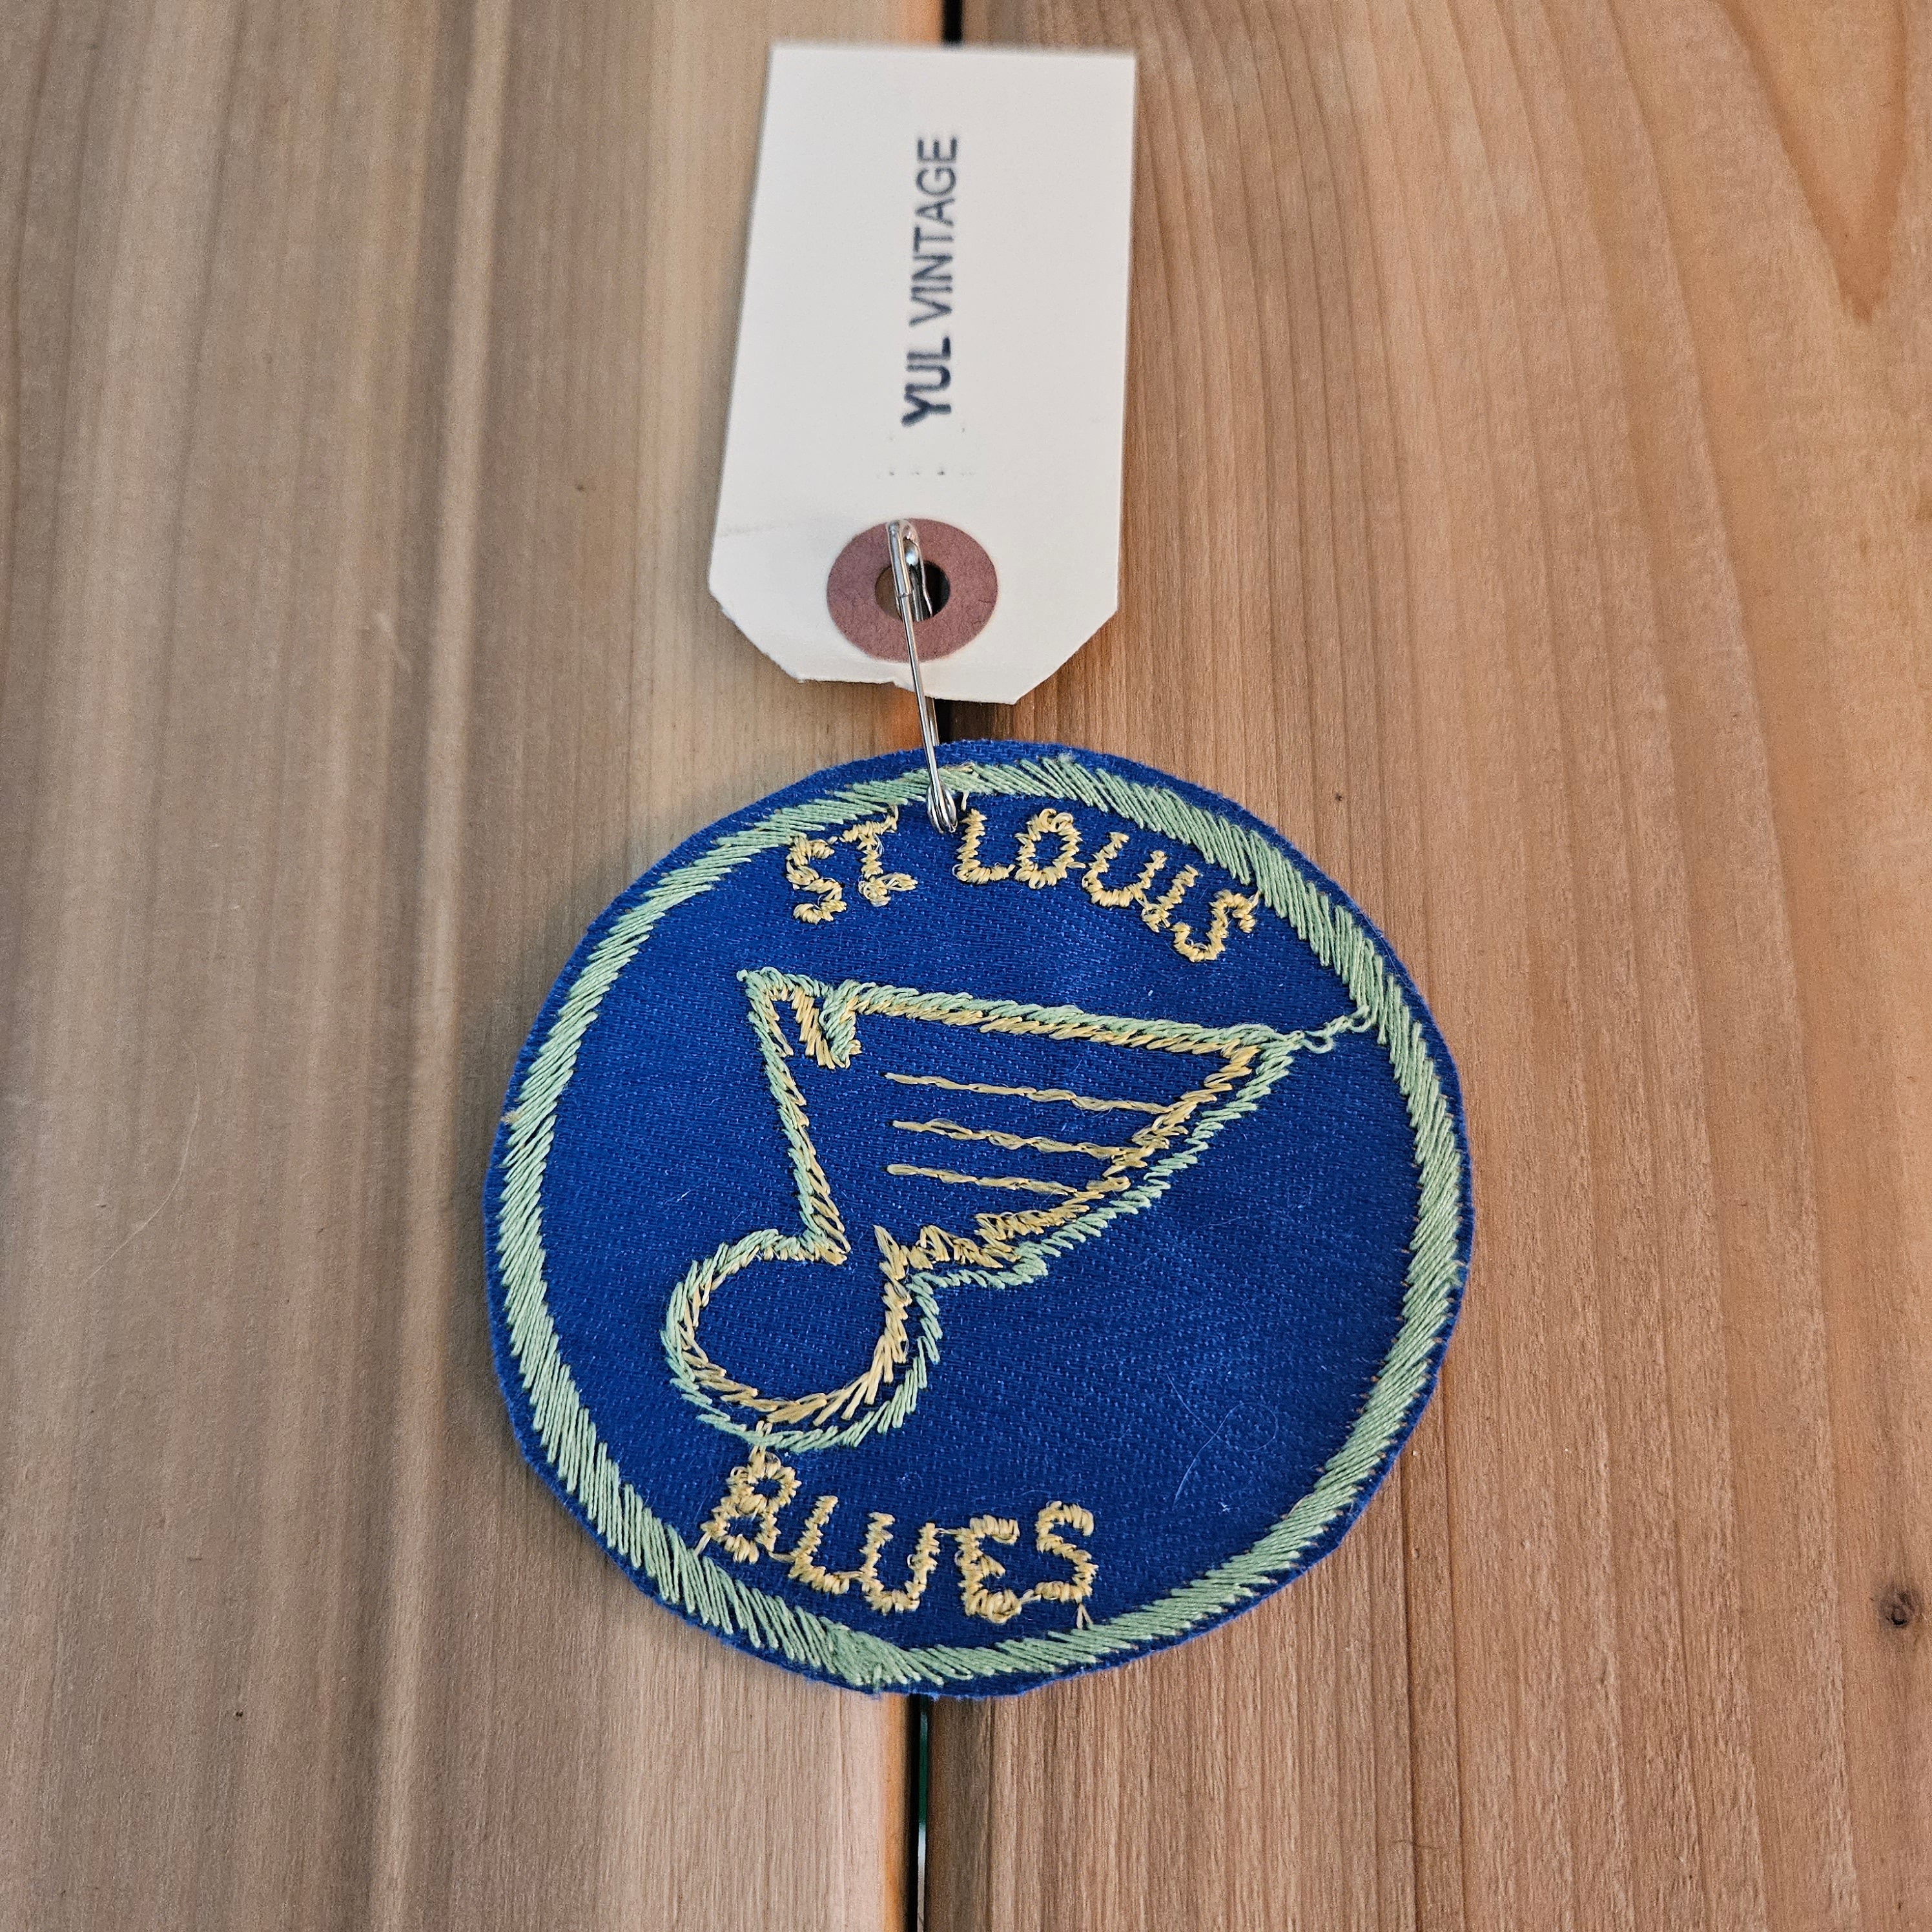 NHL Team St. Louis Blues Iron/Sew On Embroidered Badge Patch Set Of 2 Brand  New